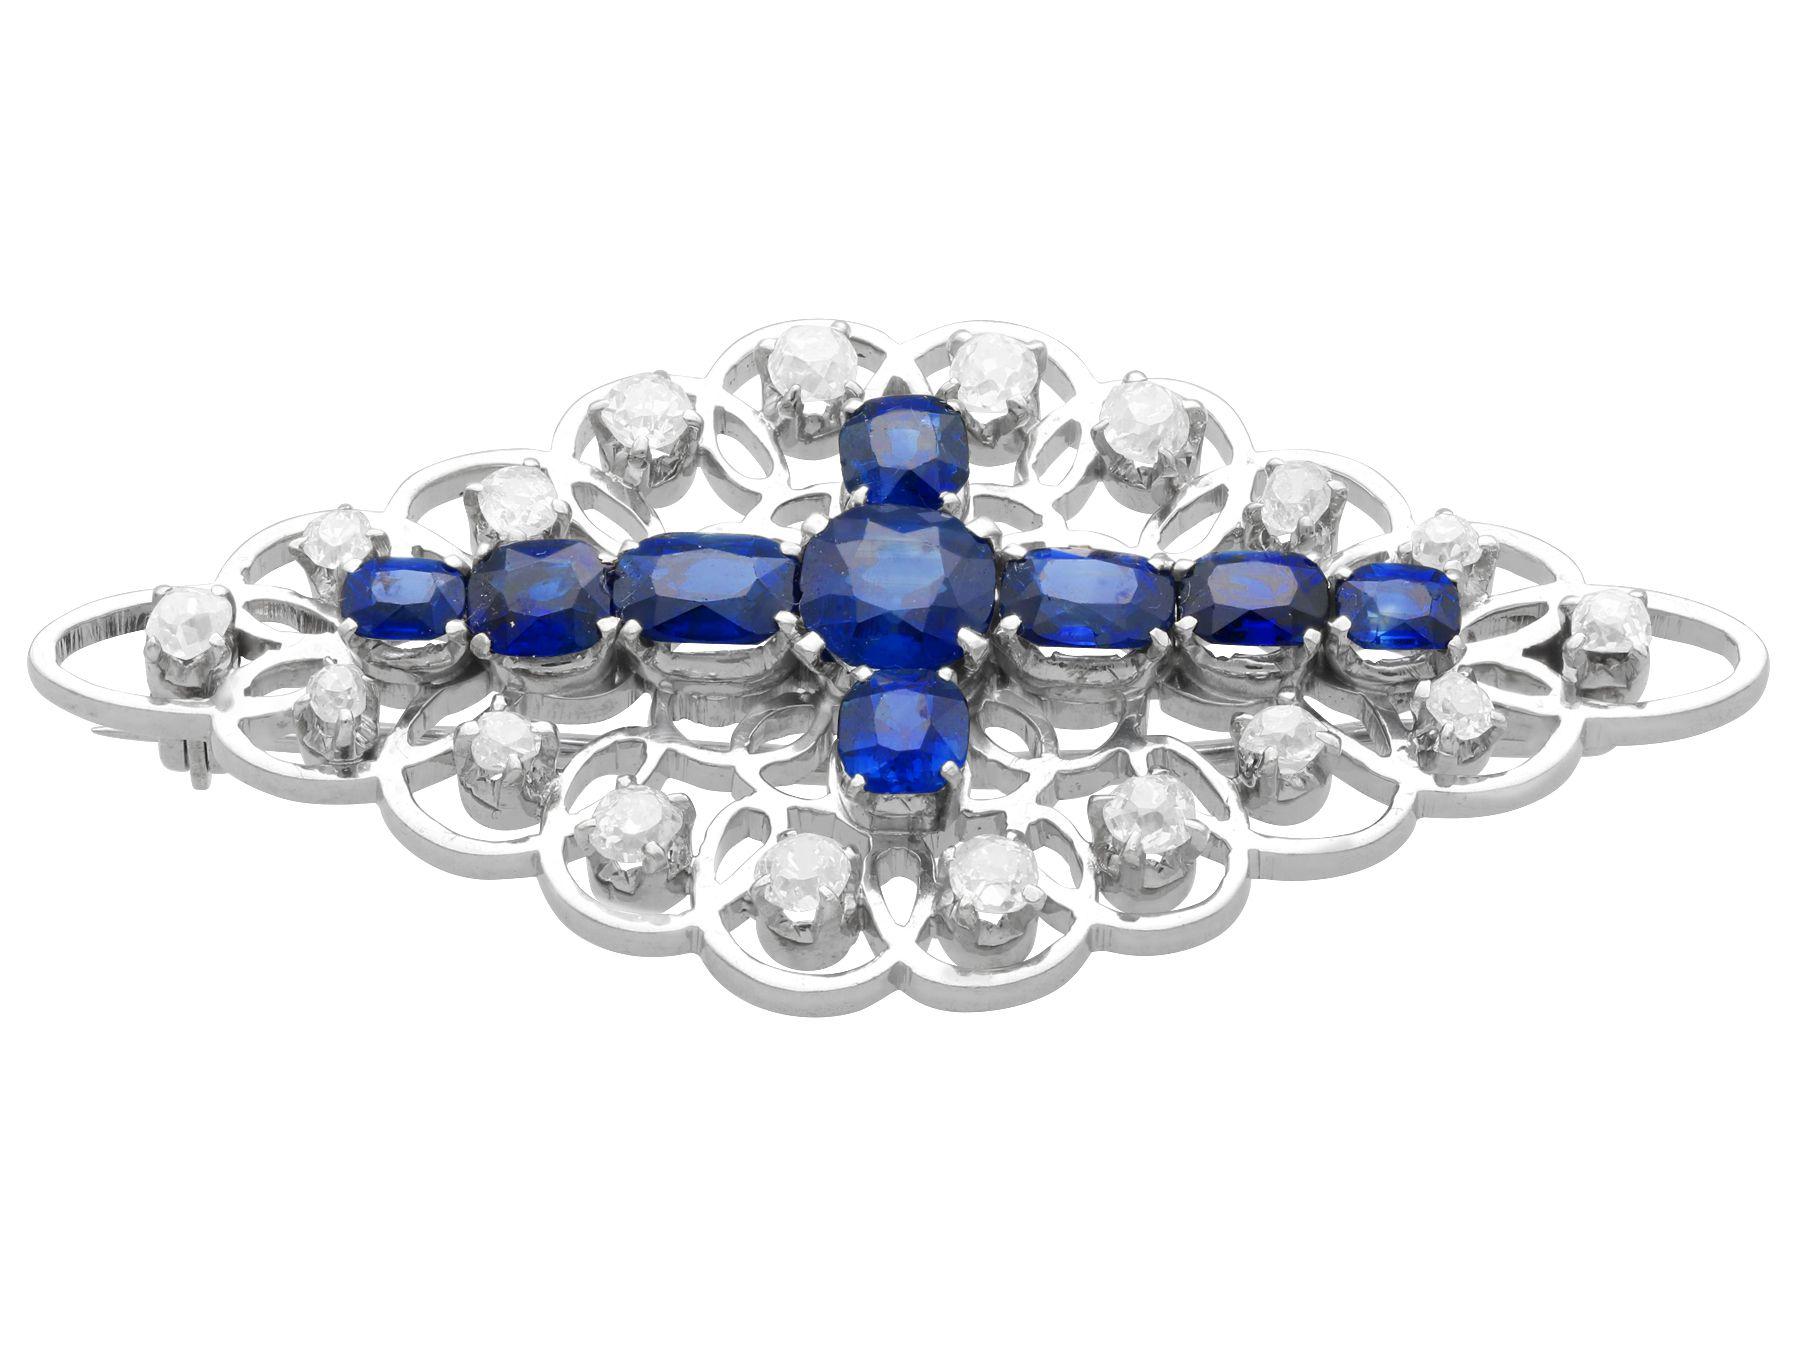 Antique 3.05 Carat Sapphire and 1.23ct Diamond White Gold Brooch, circa 1935 In Excellent Condition For Sale In Jesmond, Newcastle Upon Tyne